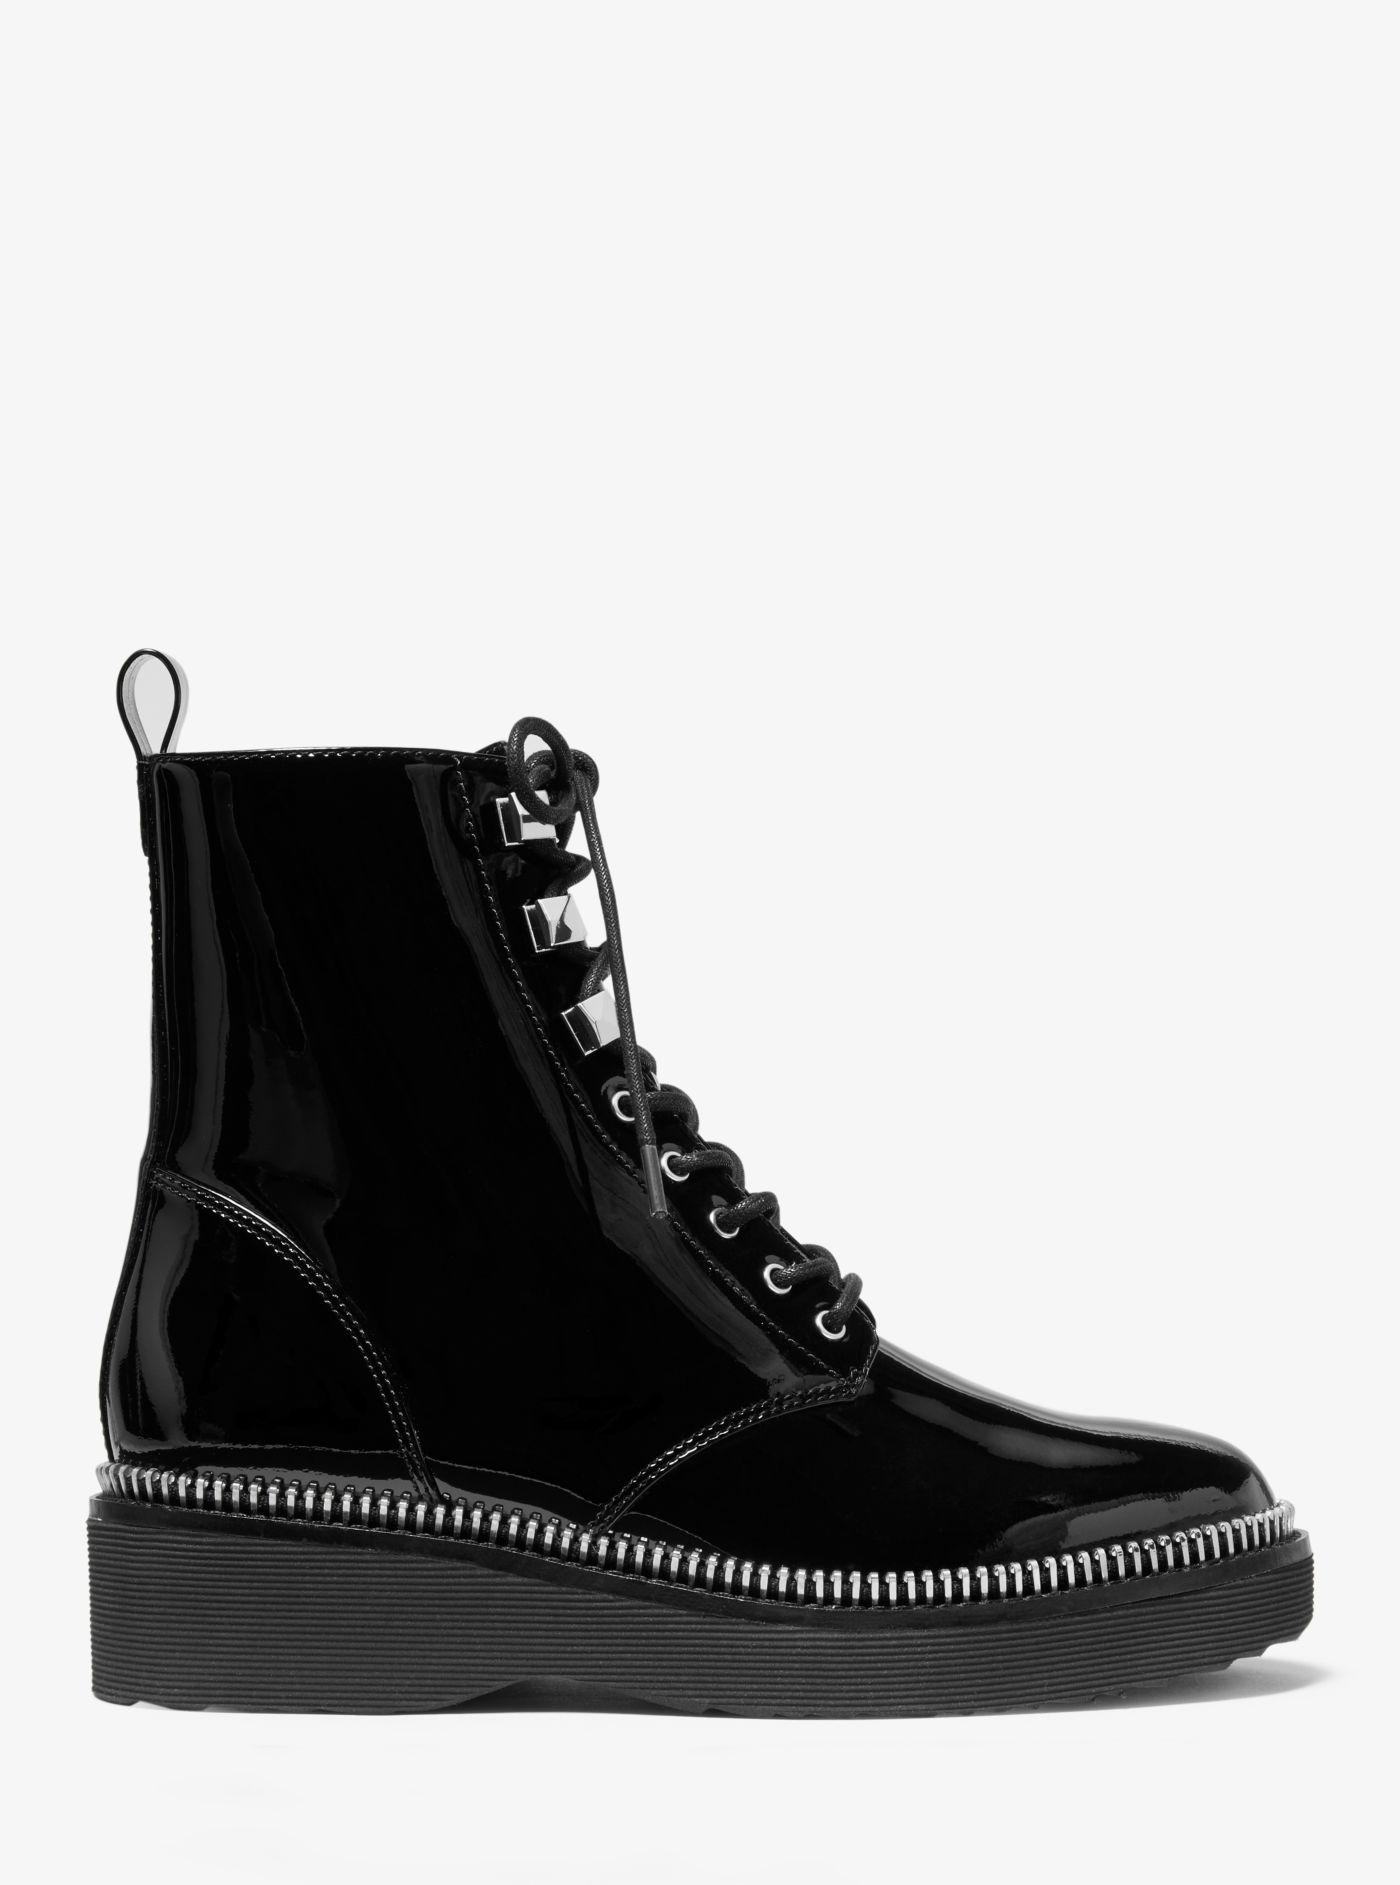 MICHAEL Michael Kors Haskell Patent Leather Combat Boot in Black | Lyst